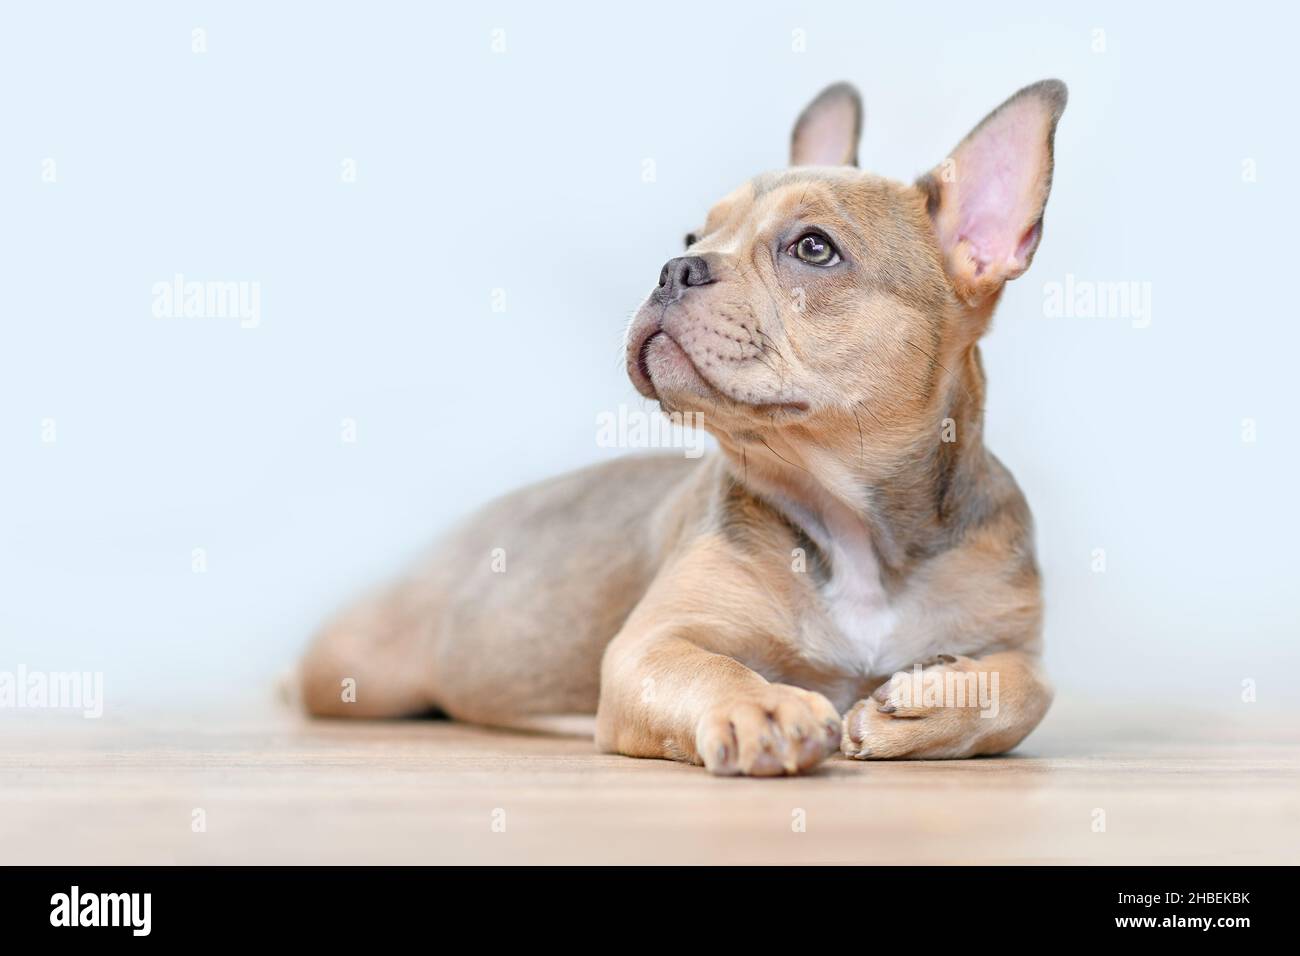 Sable French Bulldog dog puppy with healthy nose lying down Stock Photo